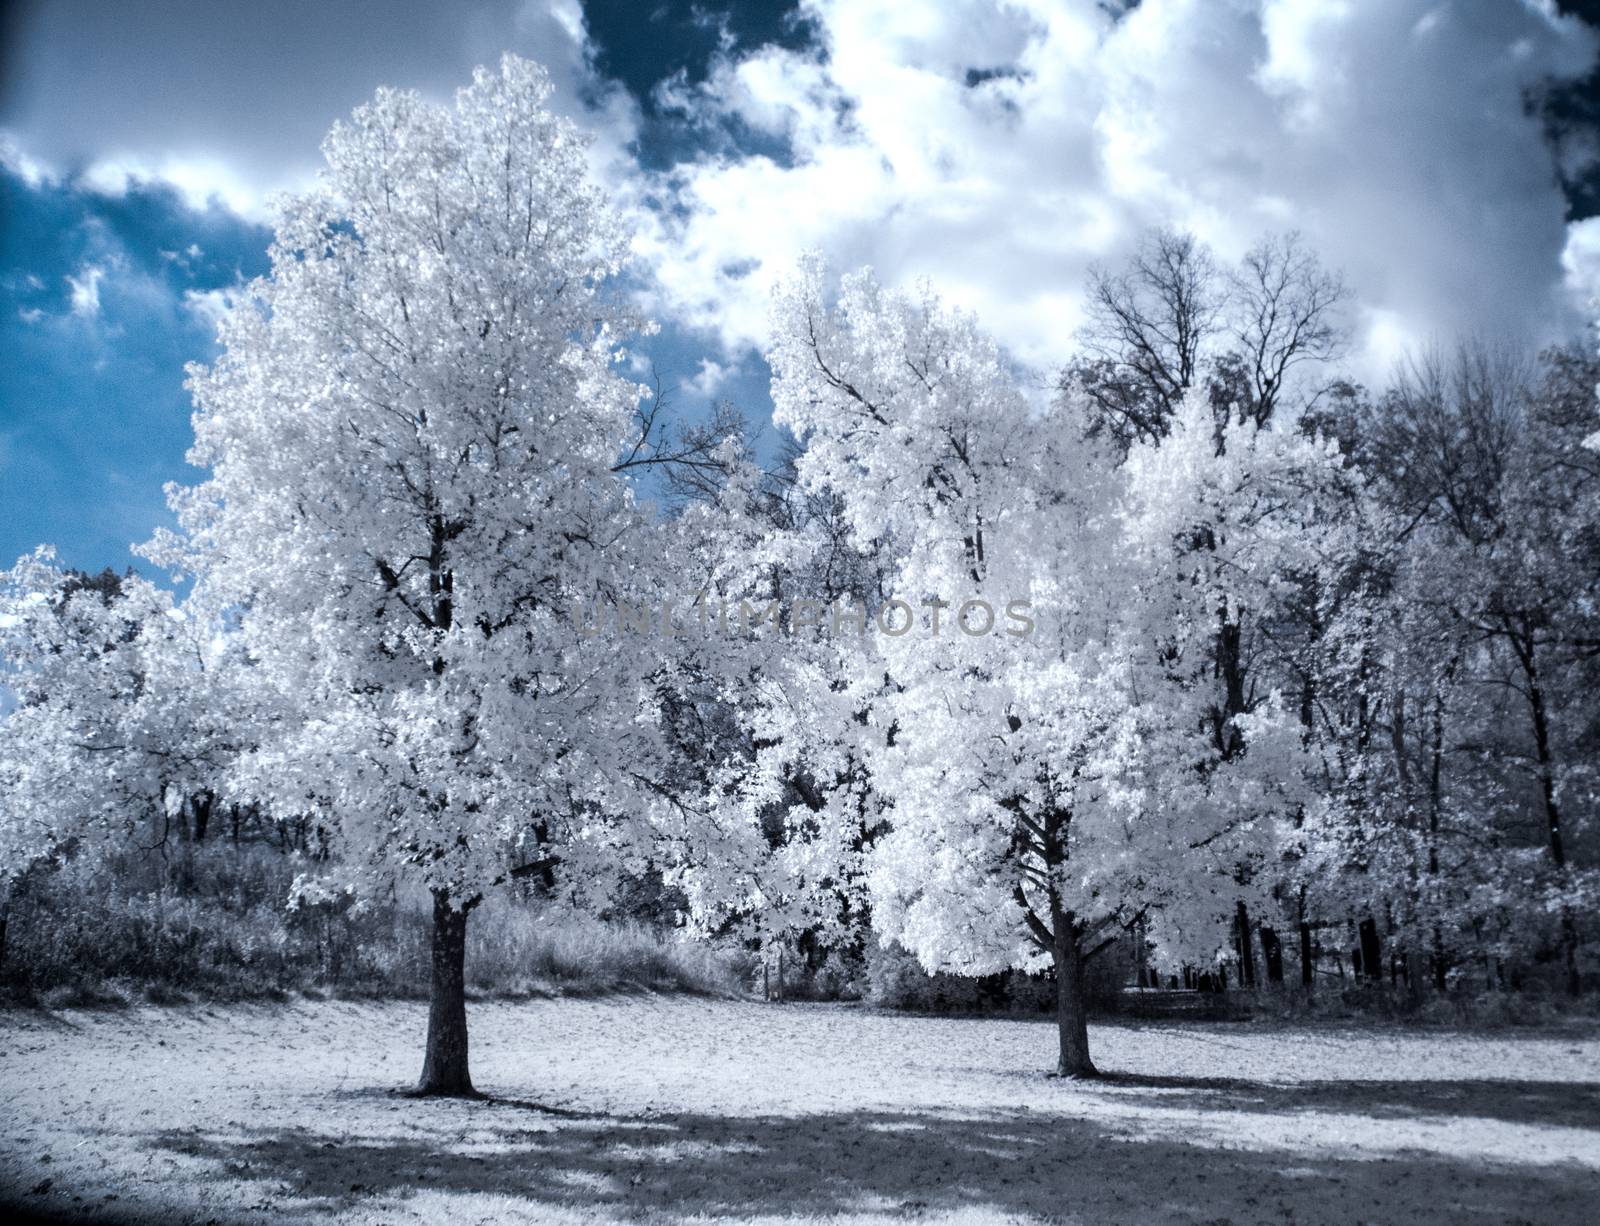 Infrared Landscape with Beautiful White trees and Water